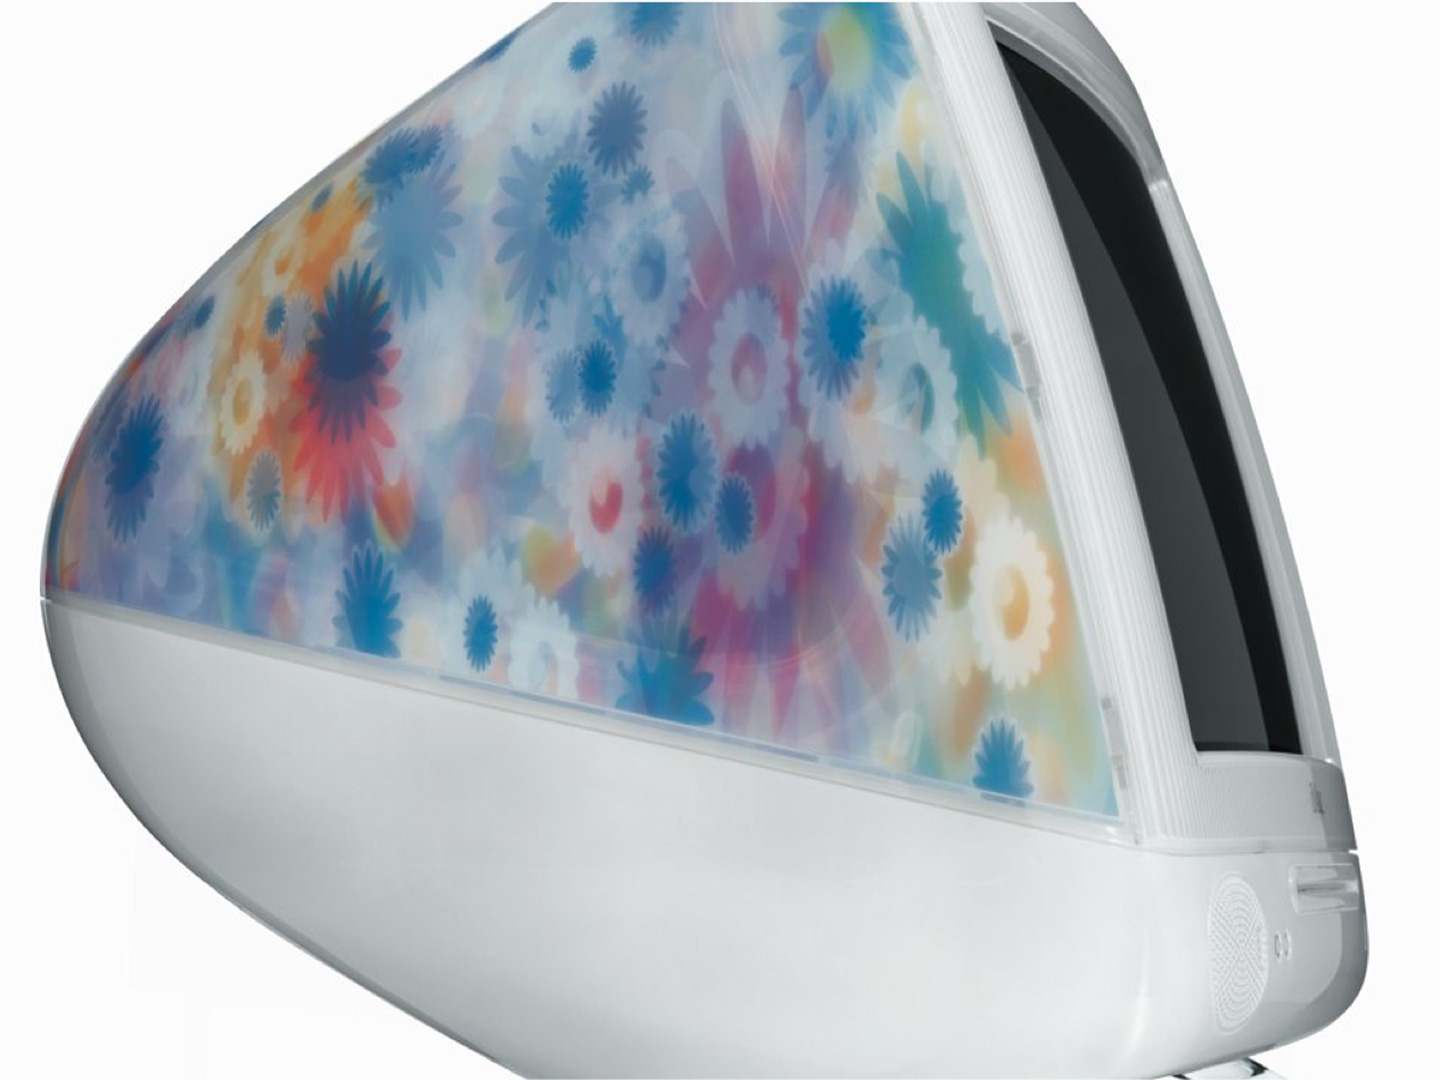 iMac In-Mold Graphic Design Innovation